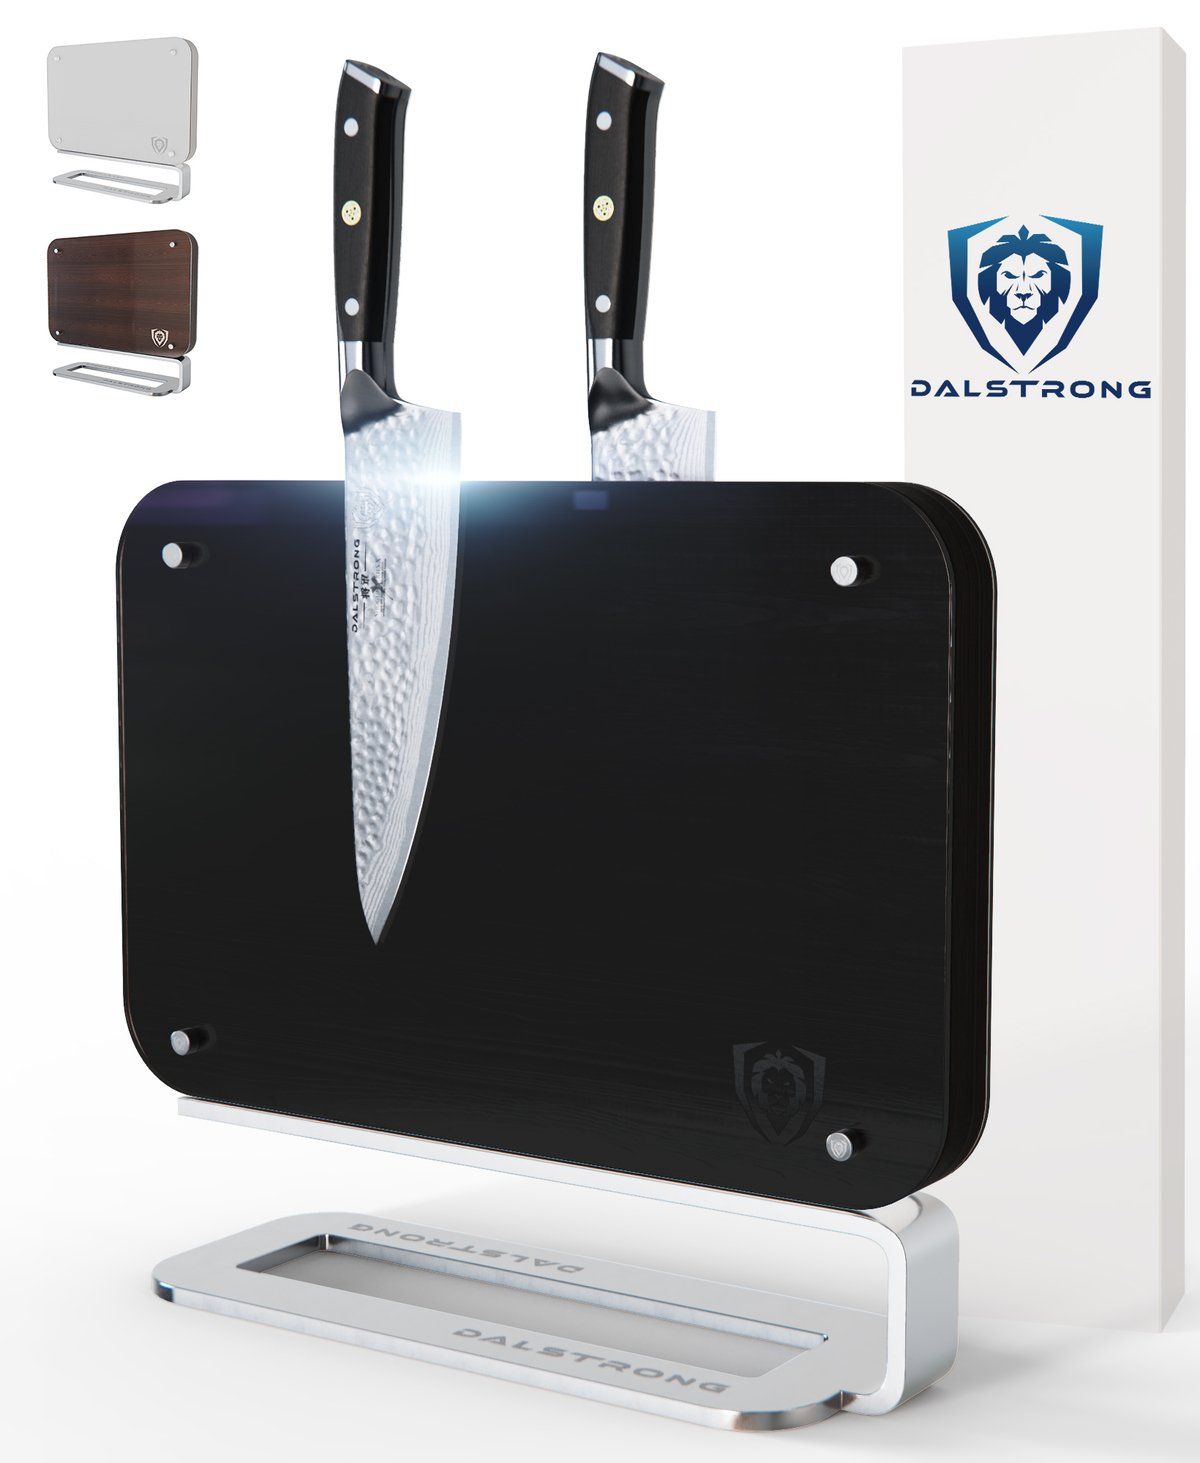 Vader Black | Double-Sided Magnetic Blade Wall | Dalstrong ©